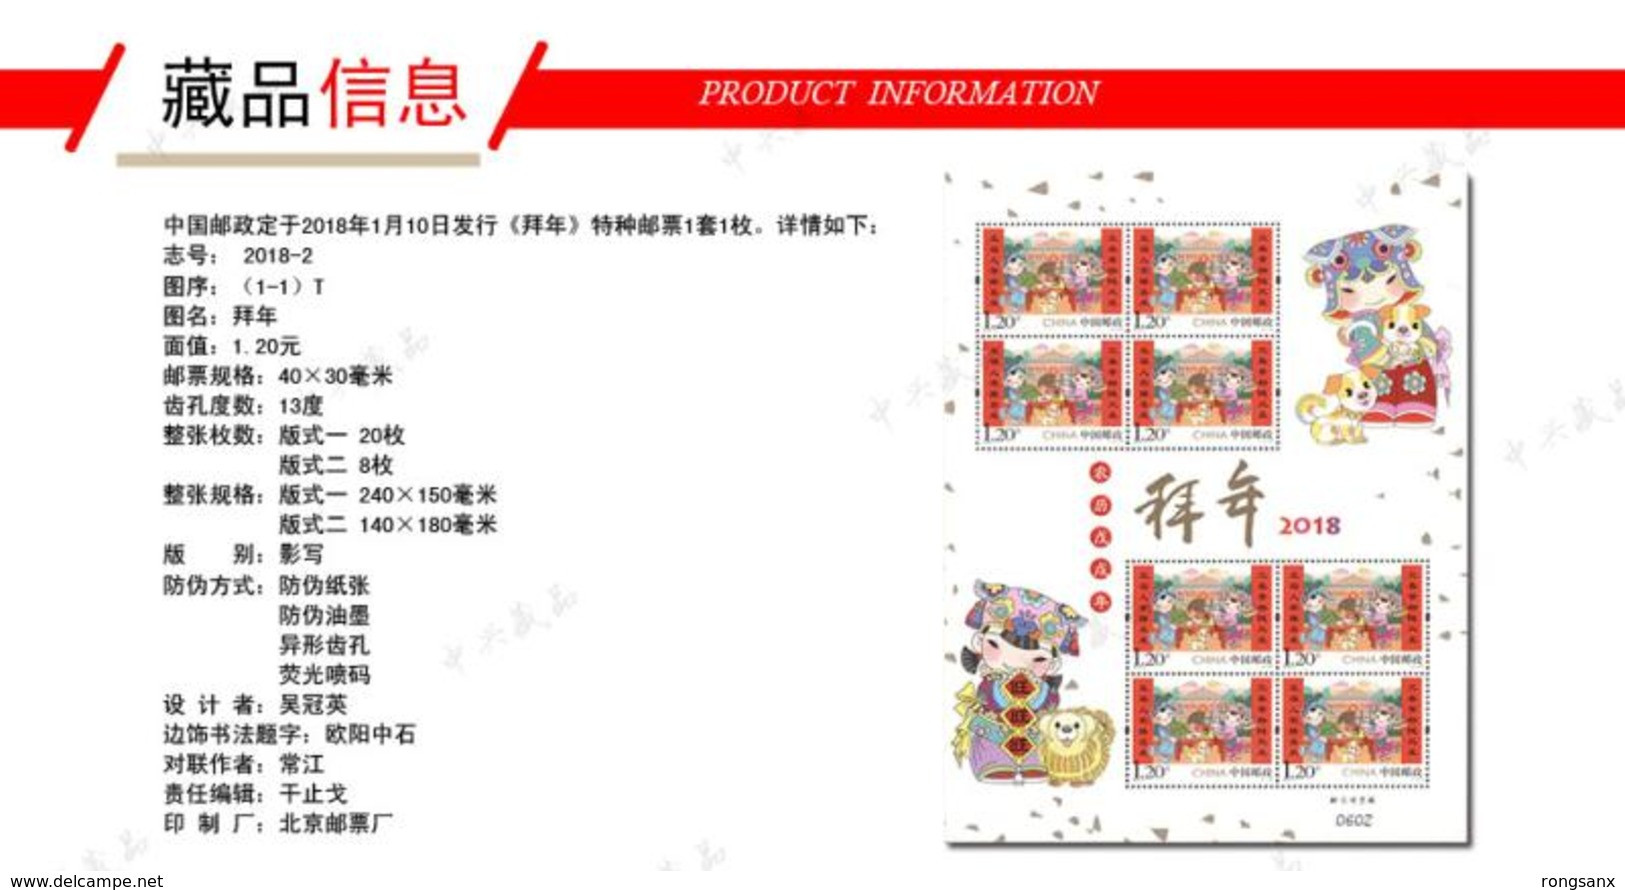 China 2018 SHEETLET YEAR PACK INCLUDE 15 SHEETLETS SEE PIC INCLUDE ALBUM - Años Completos